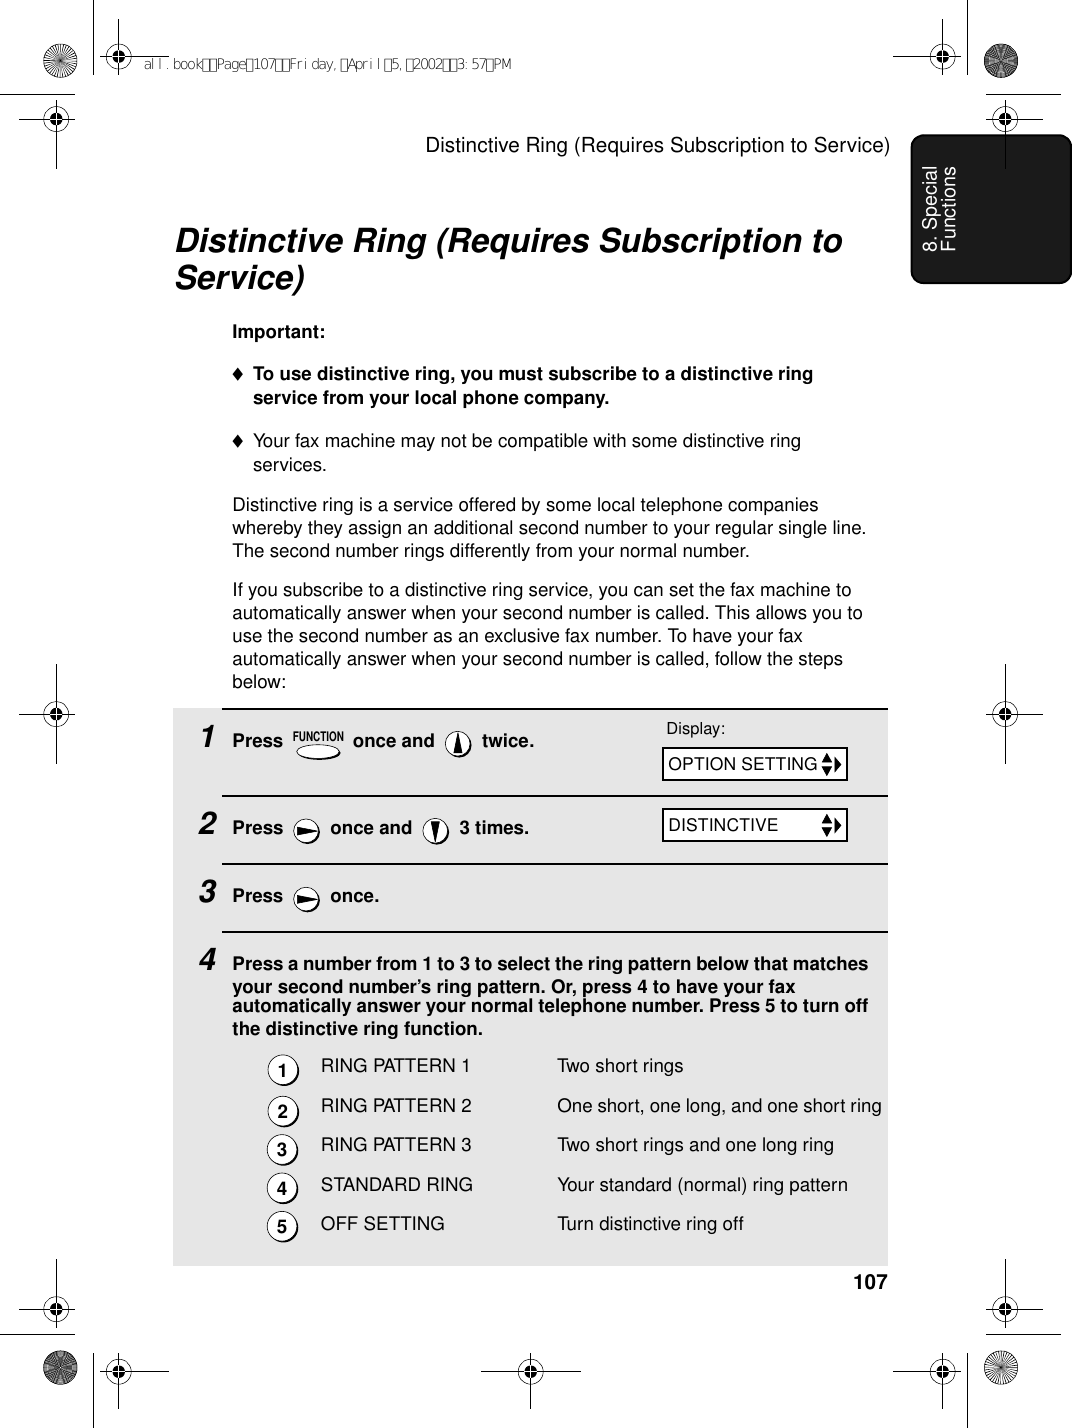 Distinctive Ring (Requires Subscription to Service)1078. Special FunctionsDistinctive Ring (Requires Subscription to Service)Important:♦To use distinctive ring, you must subscribe to a distinctive ring service from your local phone company.♦Your fax machine may not be compatible with some distinctive ring services.Distinctive ring is a service offered by some local telephone companies whereby they assign an additional second number to your regular single line. The second number rings differently from your normal number.If you subscribe to a distinctive ring service, you can set the fax machine to automatically answer when your second number is called. This allows you to use the second number as an exclusive fax number. To have your fax automatically answer when your second number is called, follow the steps below:1Press   once and   twice.2Press   once and   3 times.3Press  once.4Press a number from 1 to 3 to select the ring pattern below that matches your second number’s ring pattern. Or, press 4 to have your fax automatically answer your normal telephone number. Press 5 to turn off the distinctive ring function.RING PATTERN 1 Two short ringsRING PATTERN 2 One short, one long, and one short ringRING PATTERN 3 Two short rings and one long ringSTANDARD RING Your standard (normal) ring patternOFF SETTING Turn distinctive ring offFUNCTIONDisplay:12345OPTION SETTINGDISTINCTIVEall.bookPage107Friday,April5,20023:57PM